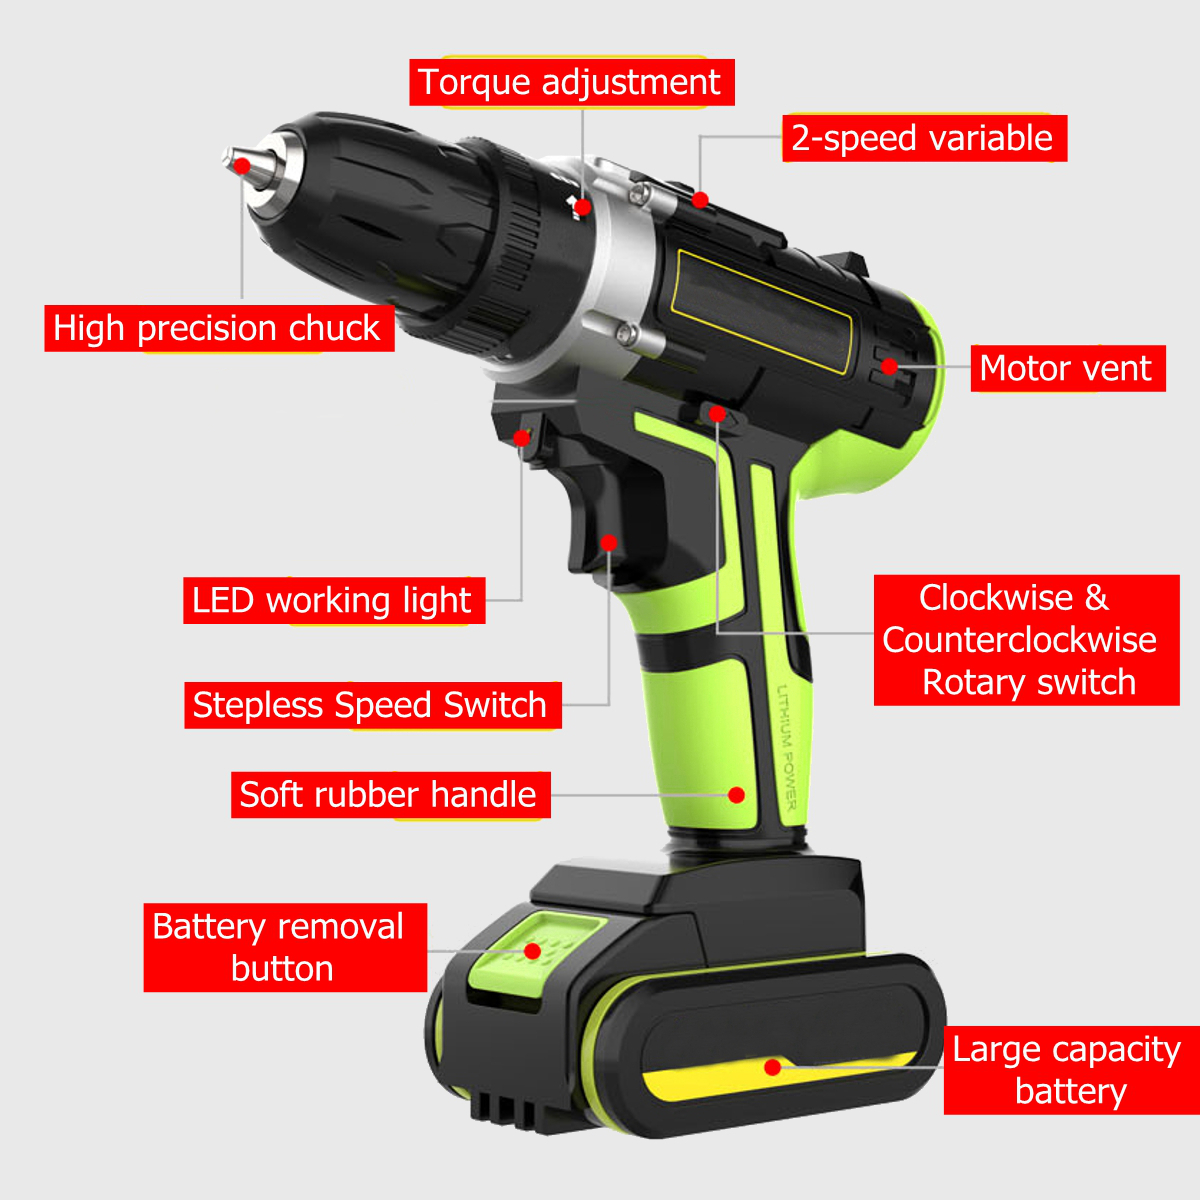 3 In 1 Hammer Drill 48V Cordless Drill Double Speed Power Drills LED lighting 1/2Pcs Large Capacity Battery 50Nm 25+1 Torque Electric Drill 17